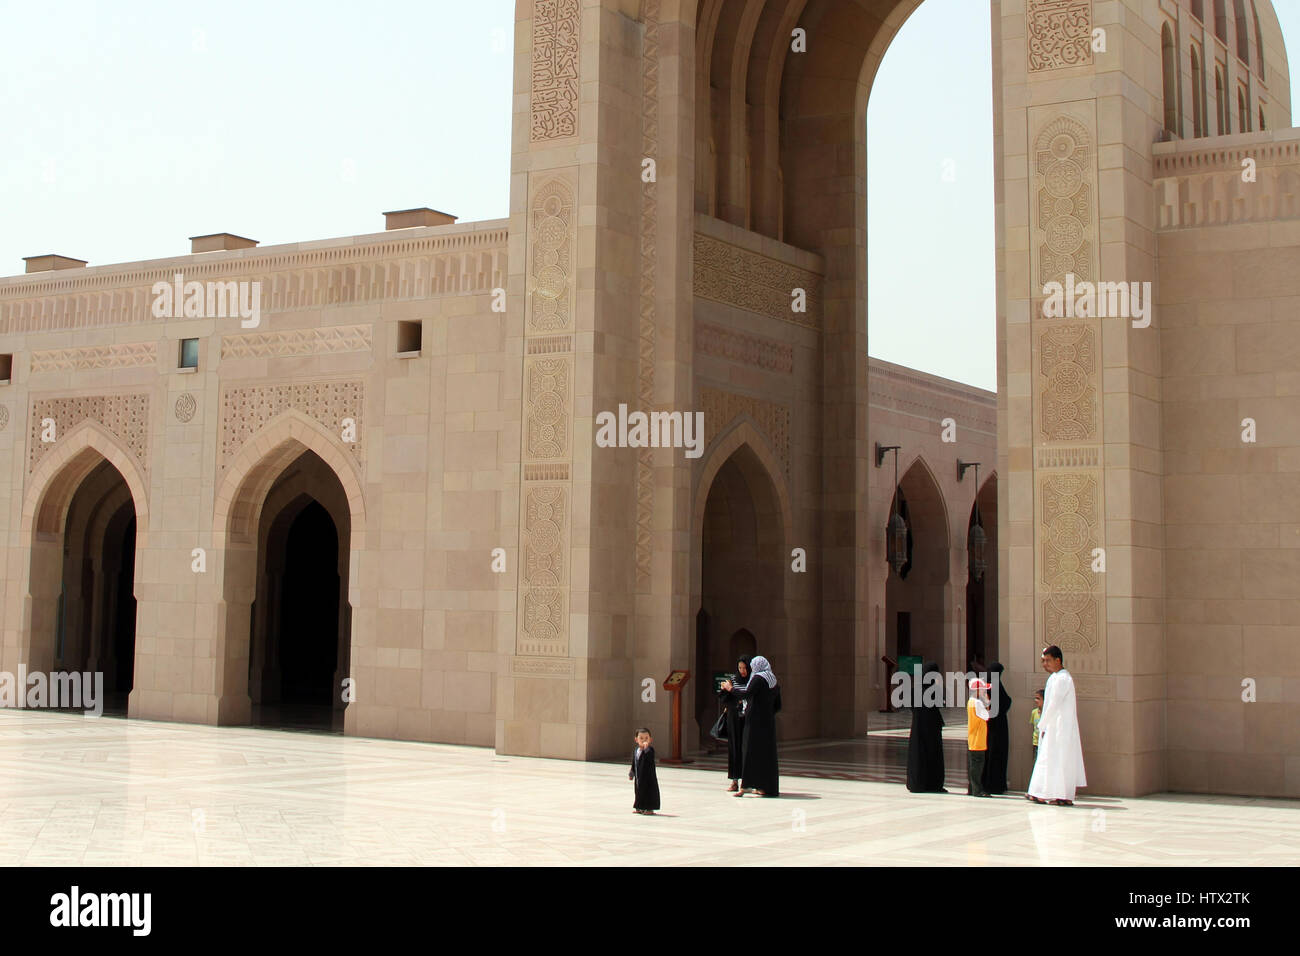 The Sultan Qaboos Grand Mosque in Muscat, Oman Stock Photo